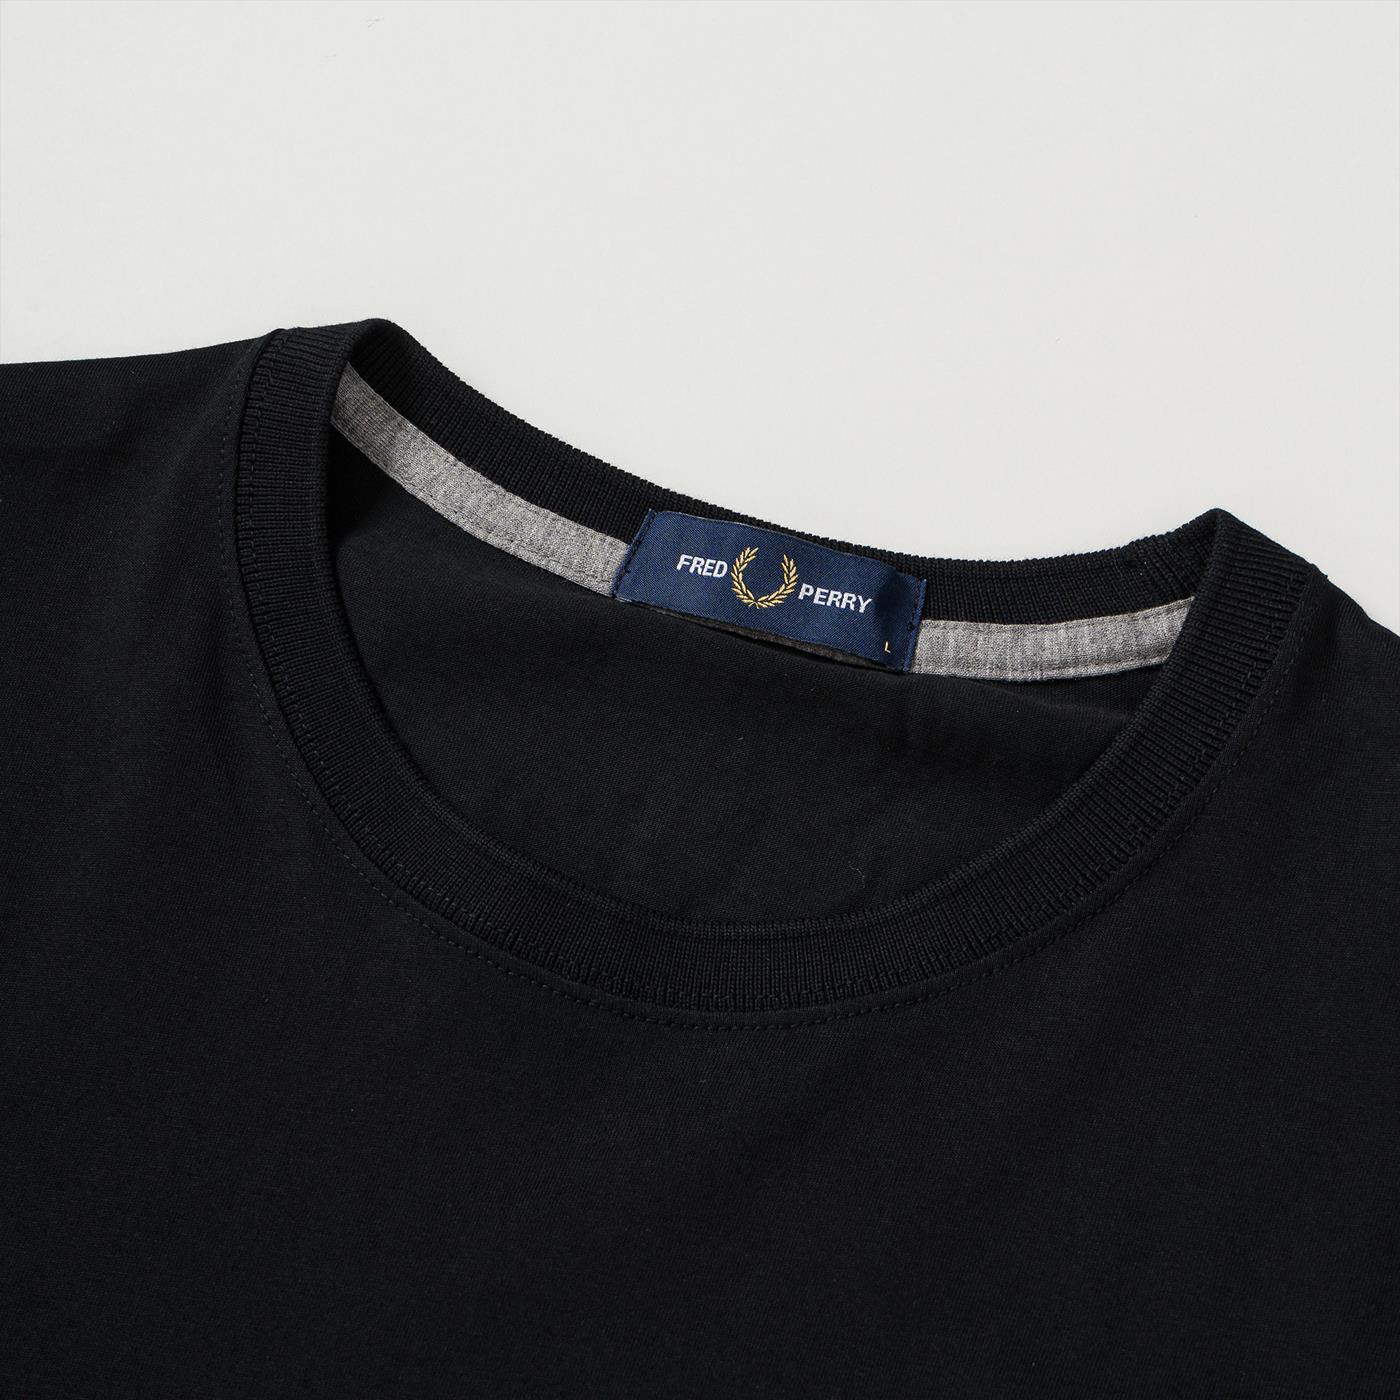 T-Shirt FRED PERRY Crew T-Shirt Black for Man | M1600-102 | XTREME.PT